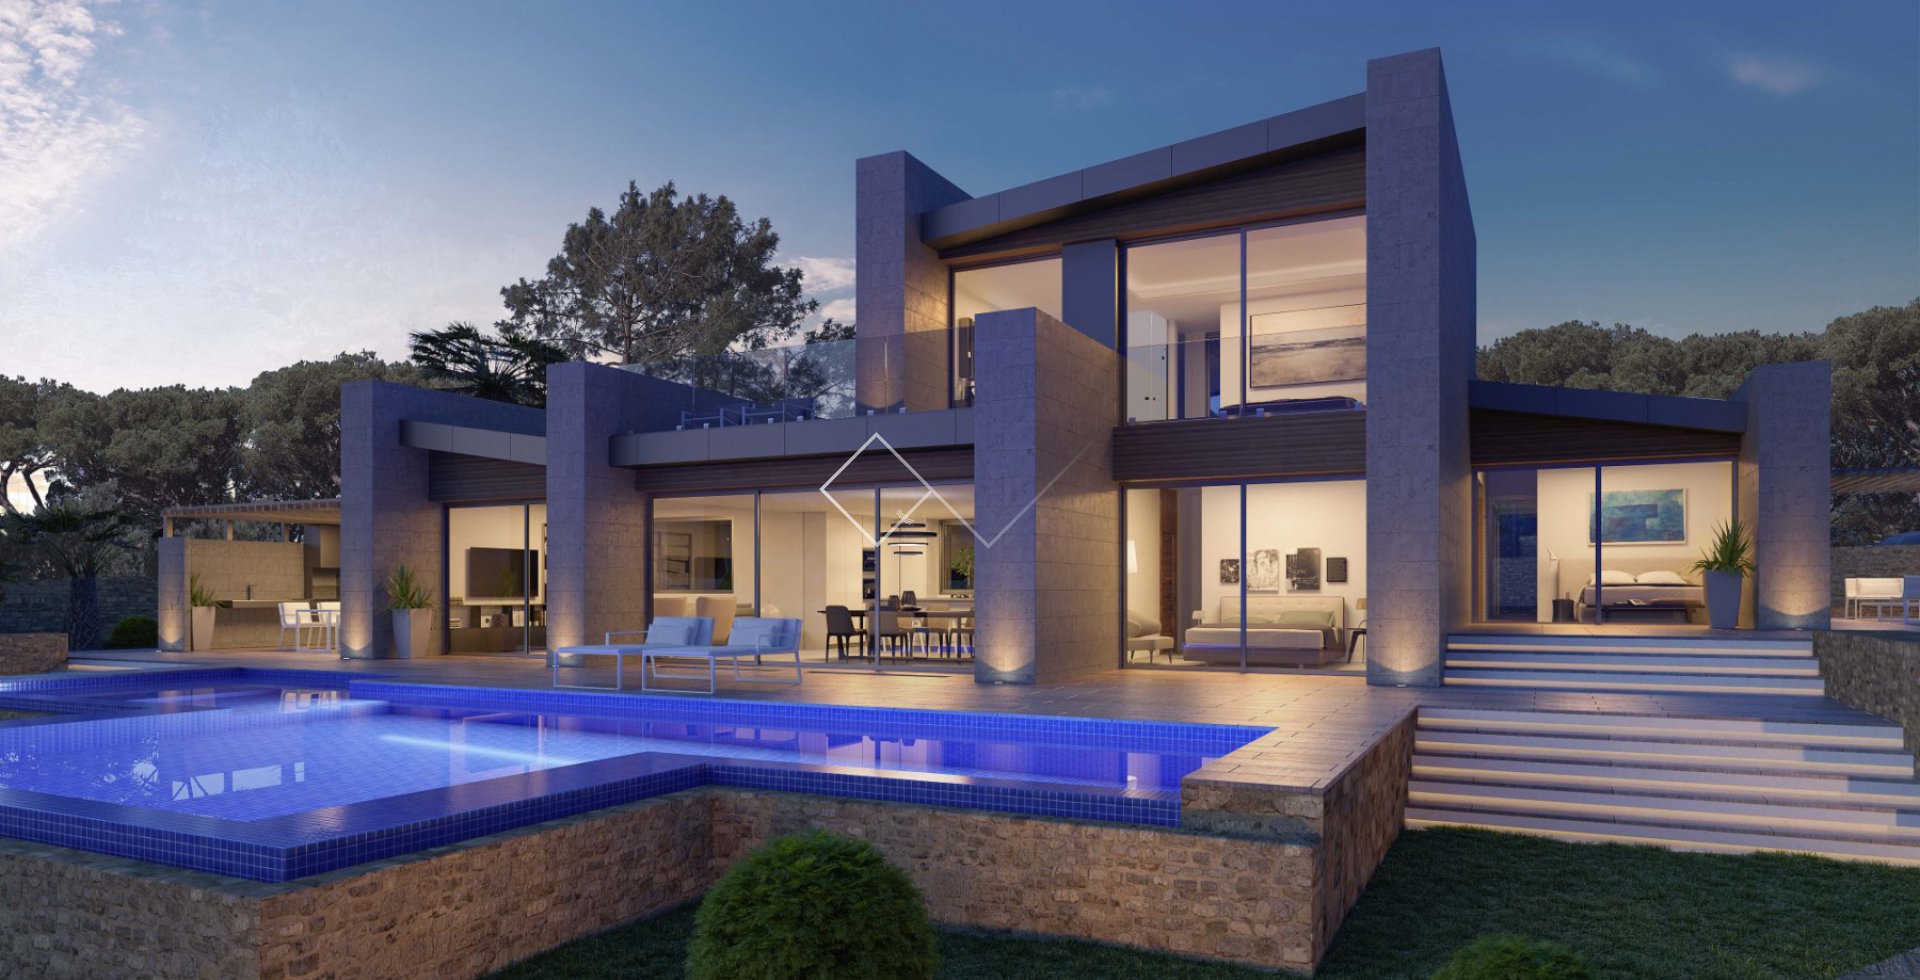 Finished project. Luxurious sea view villa in Javea